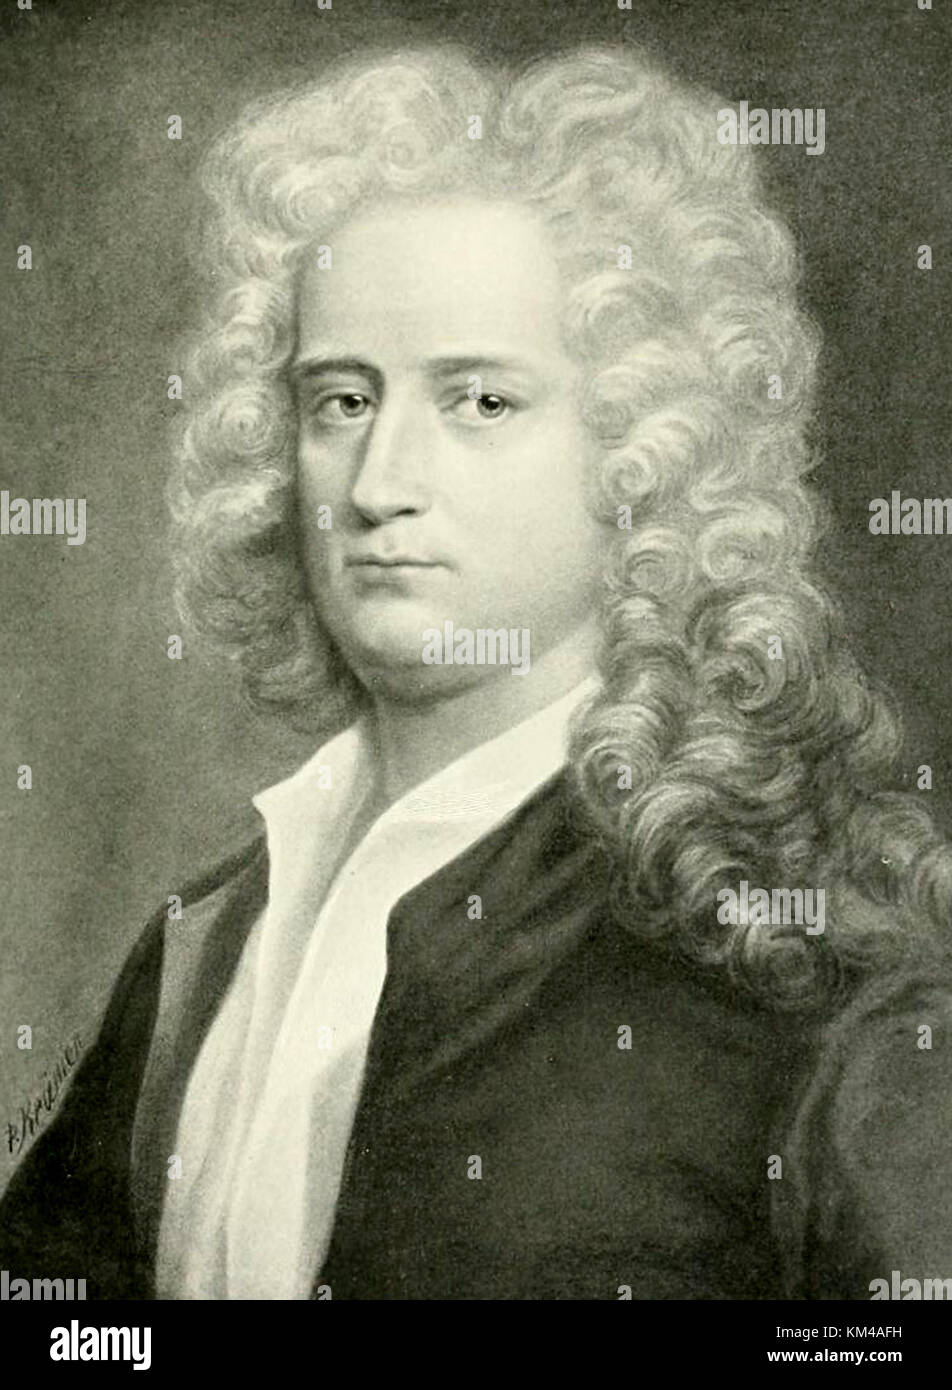 Joseph Addison, English poet, playwright, and politician. He Stock ...